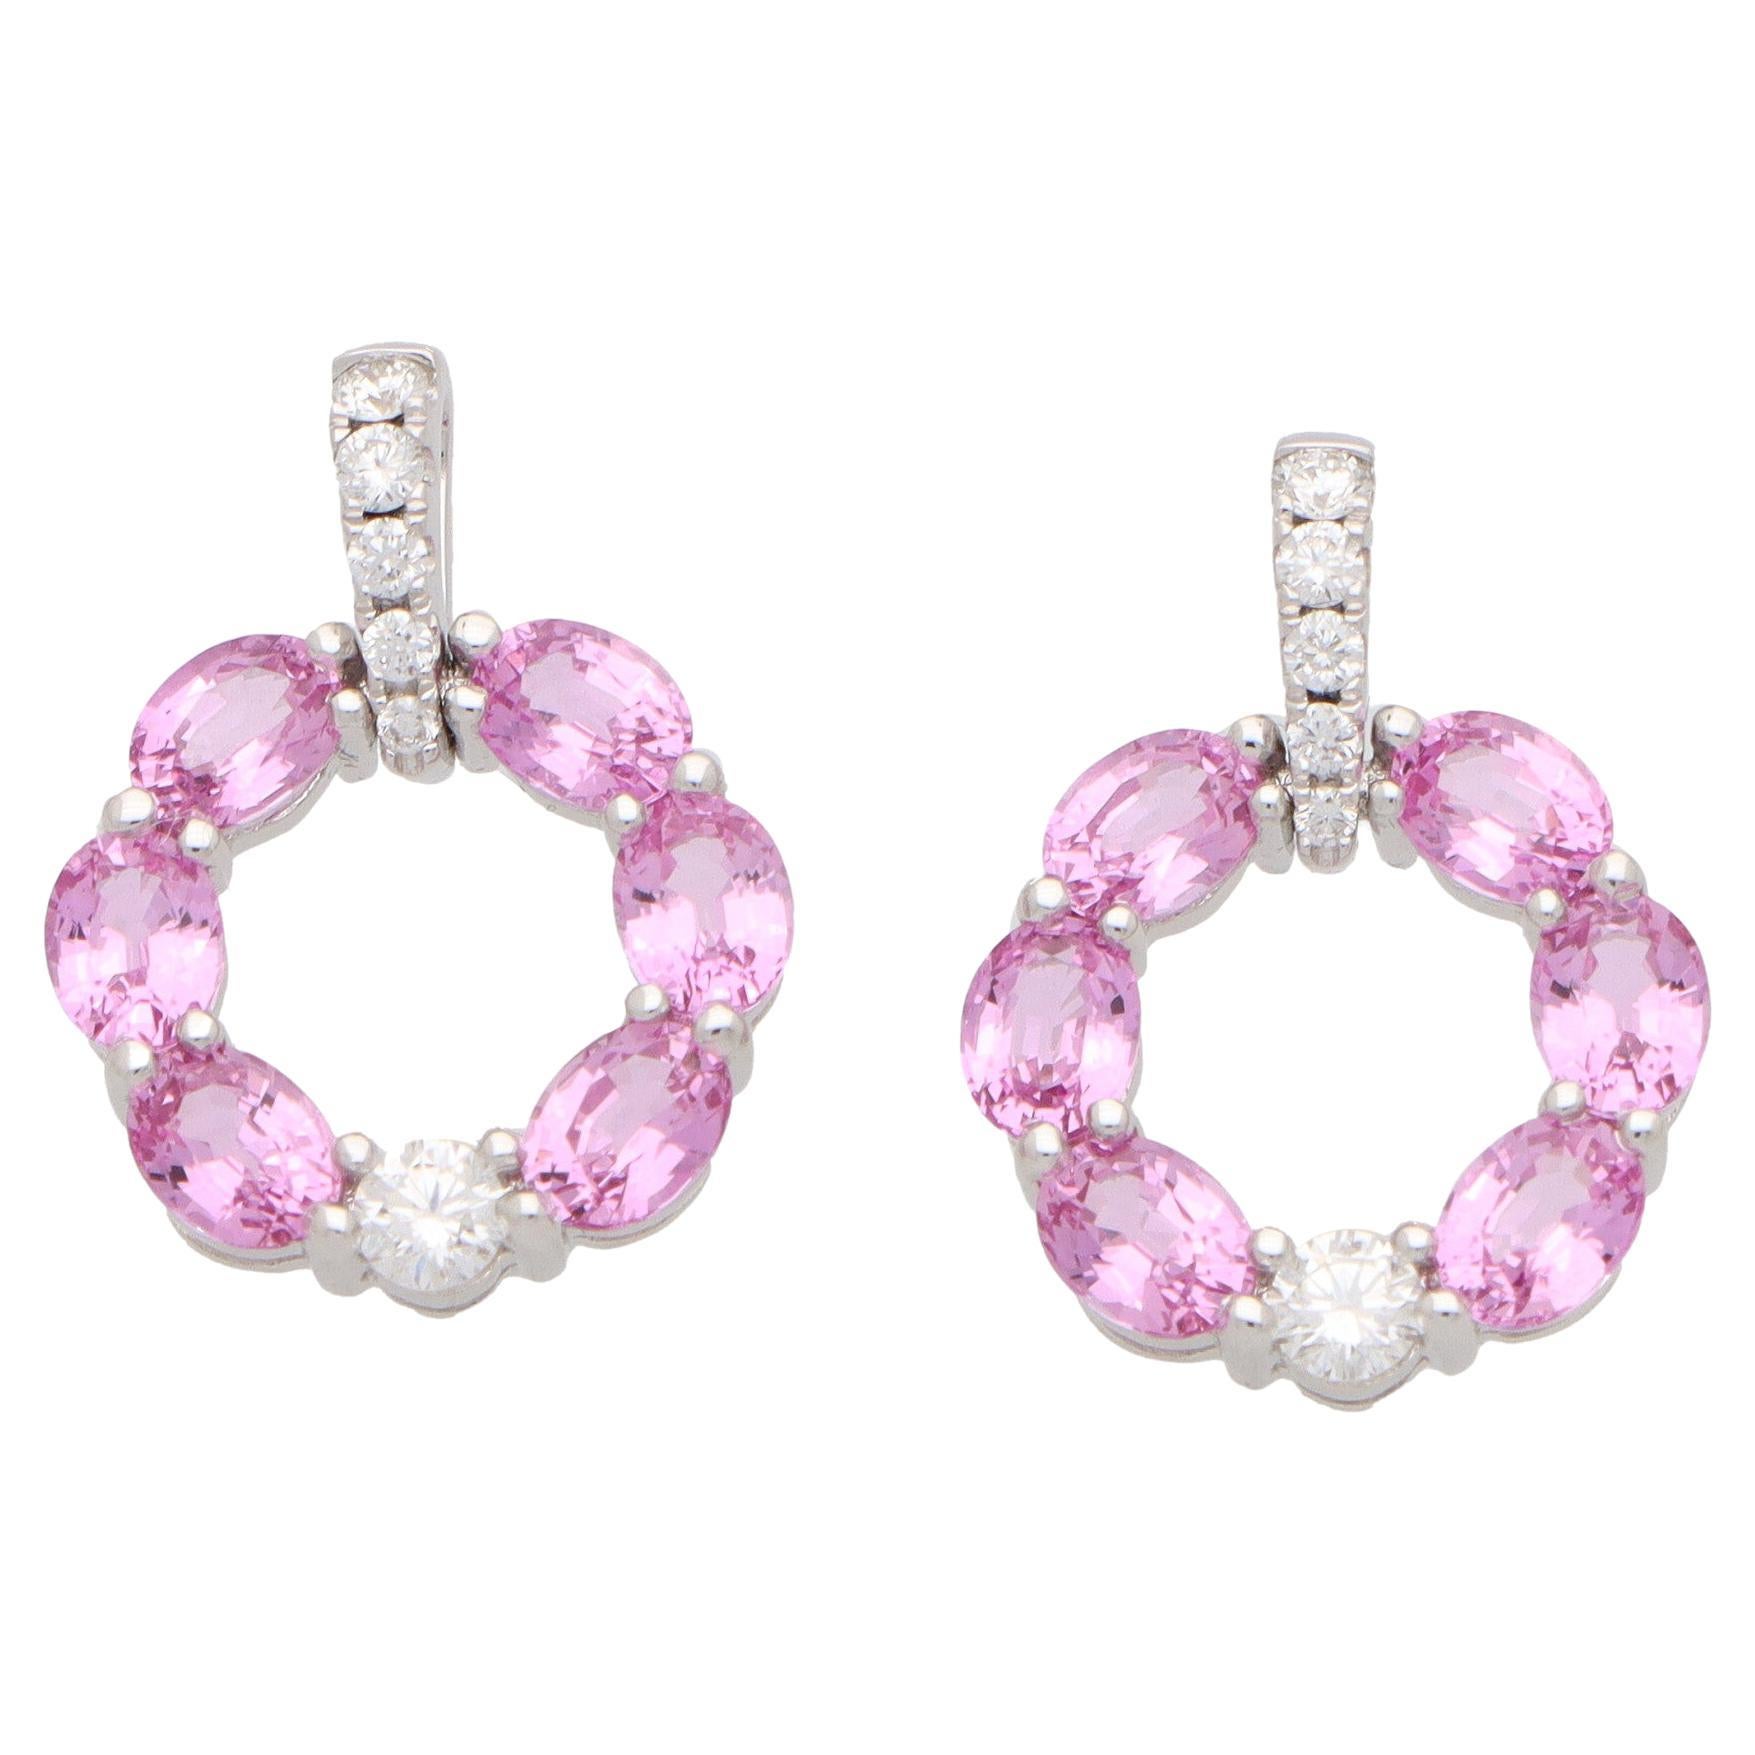 Contemporary Patel Pink Sapphire and Diamond Earrings in 18k White Gold For Sale